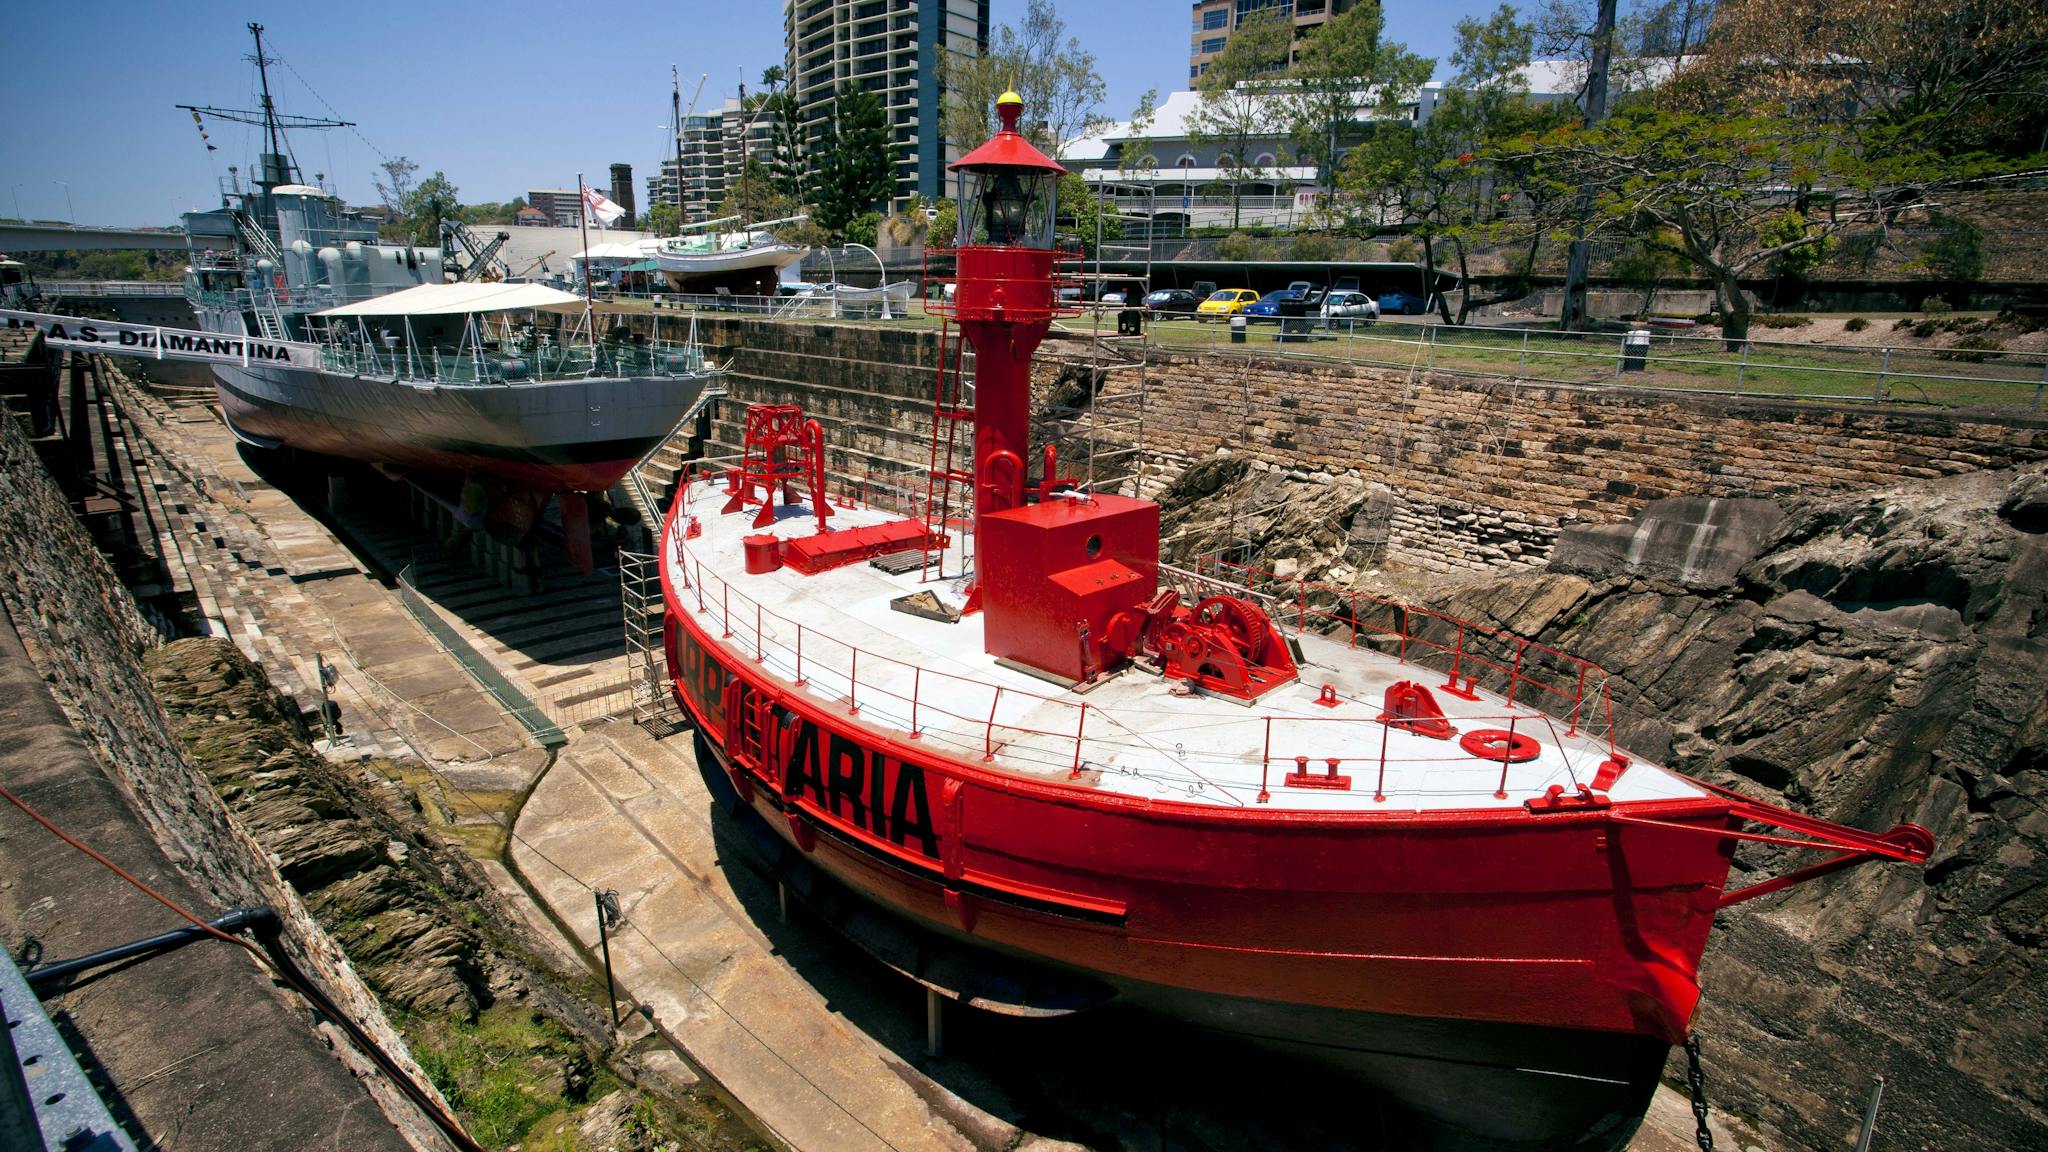 Lightship and warship Diamantina in the South Brisbane Dry Dock